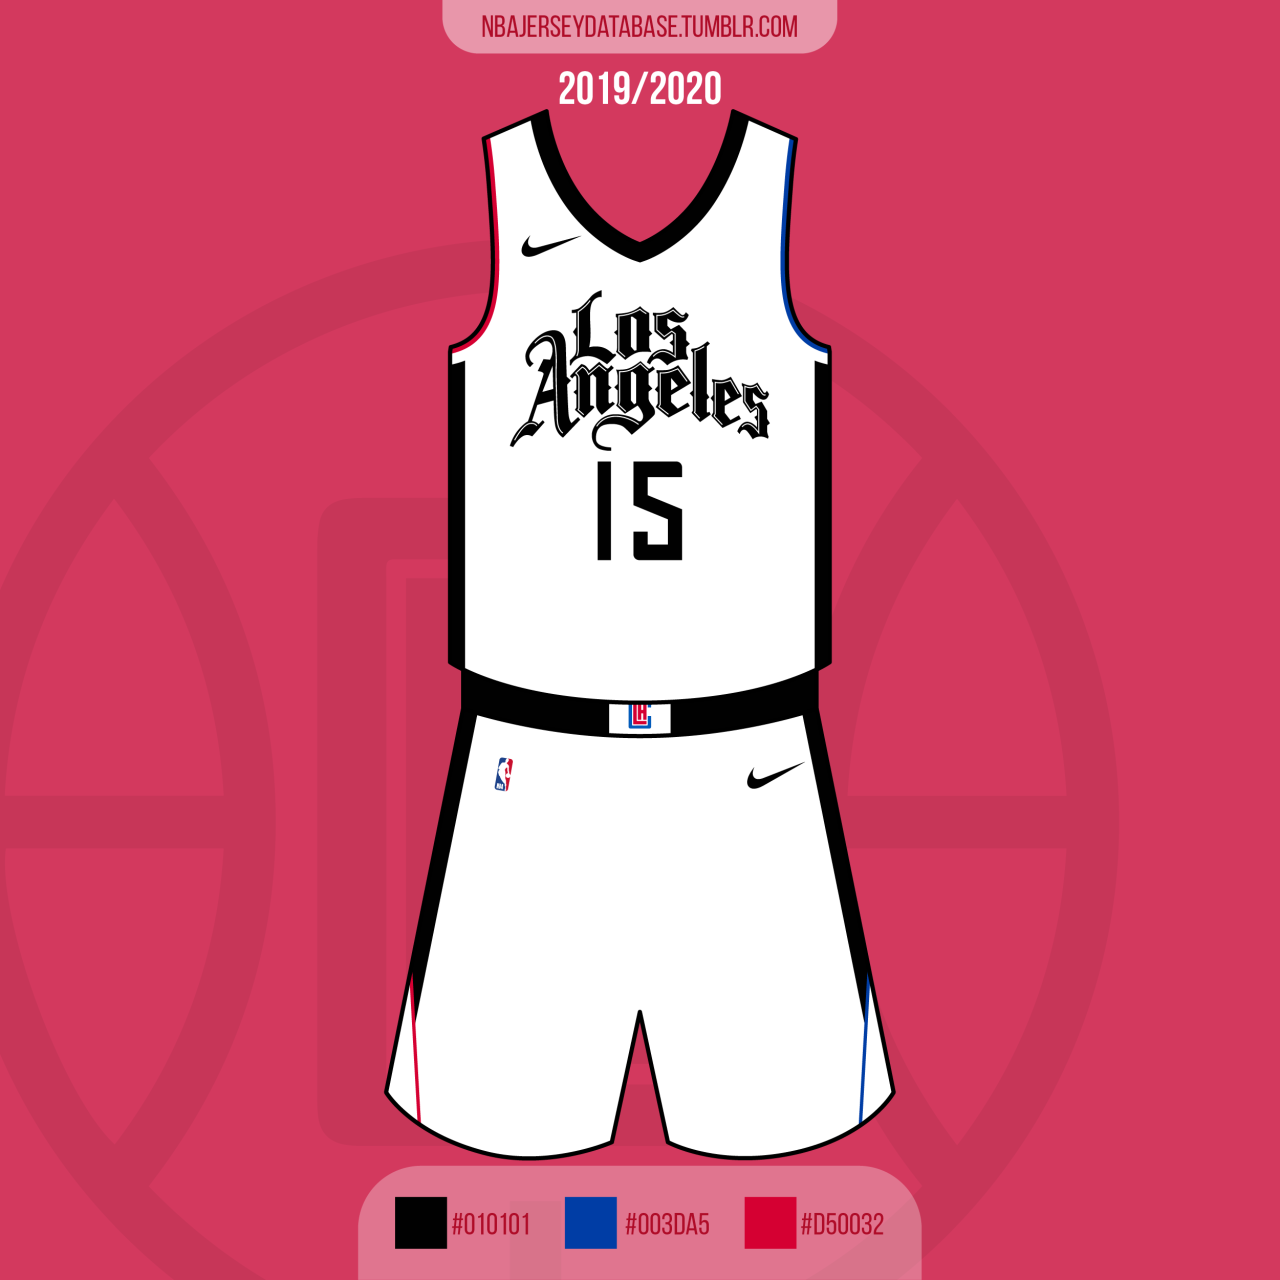 NBA Jersey Database, Los Angeles Clippers City Jersey 2017-2018